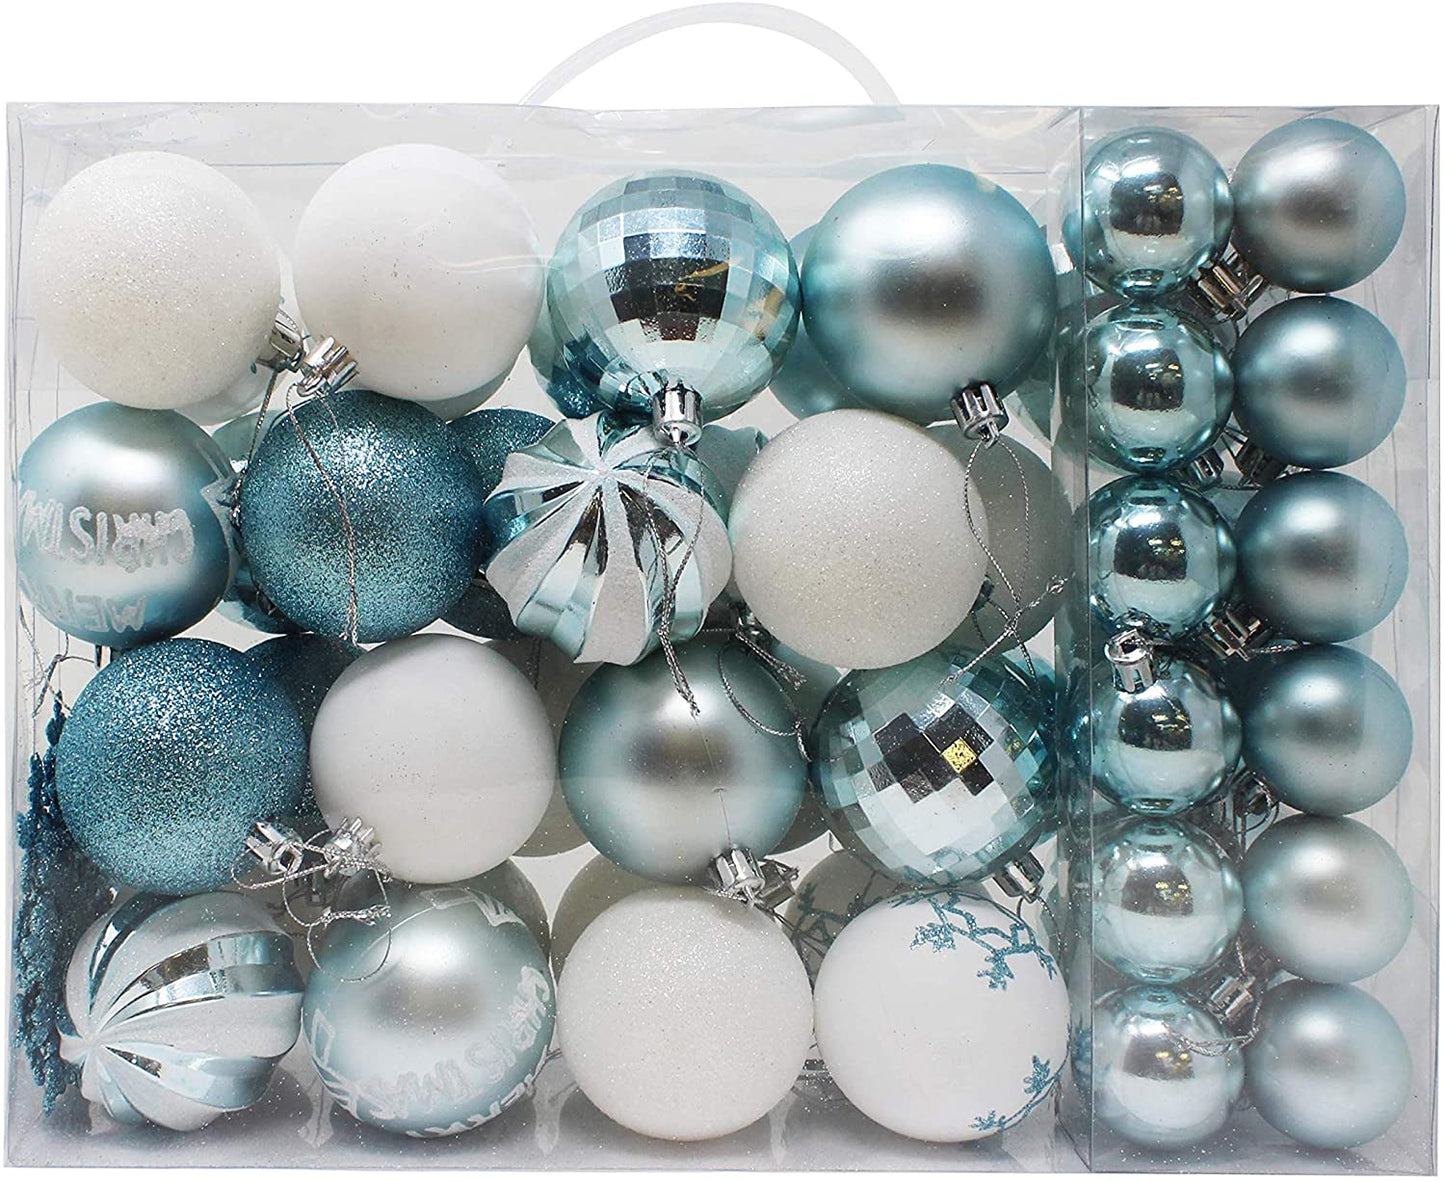 50 Pcs Christmas Ornaments, Blue and White